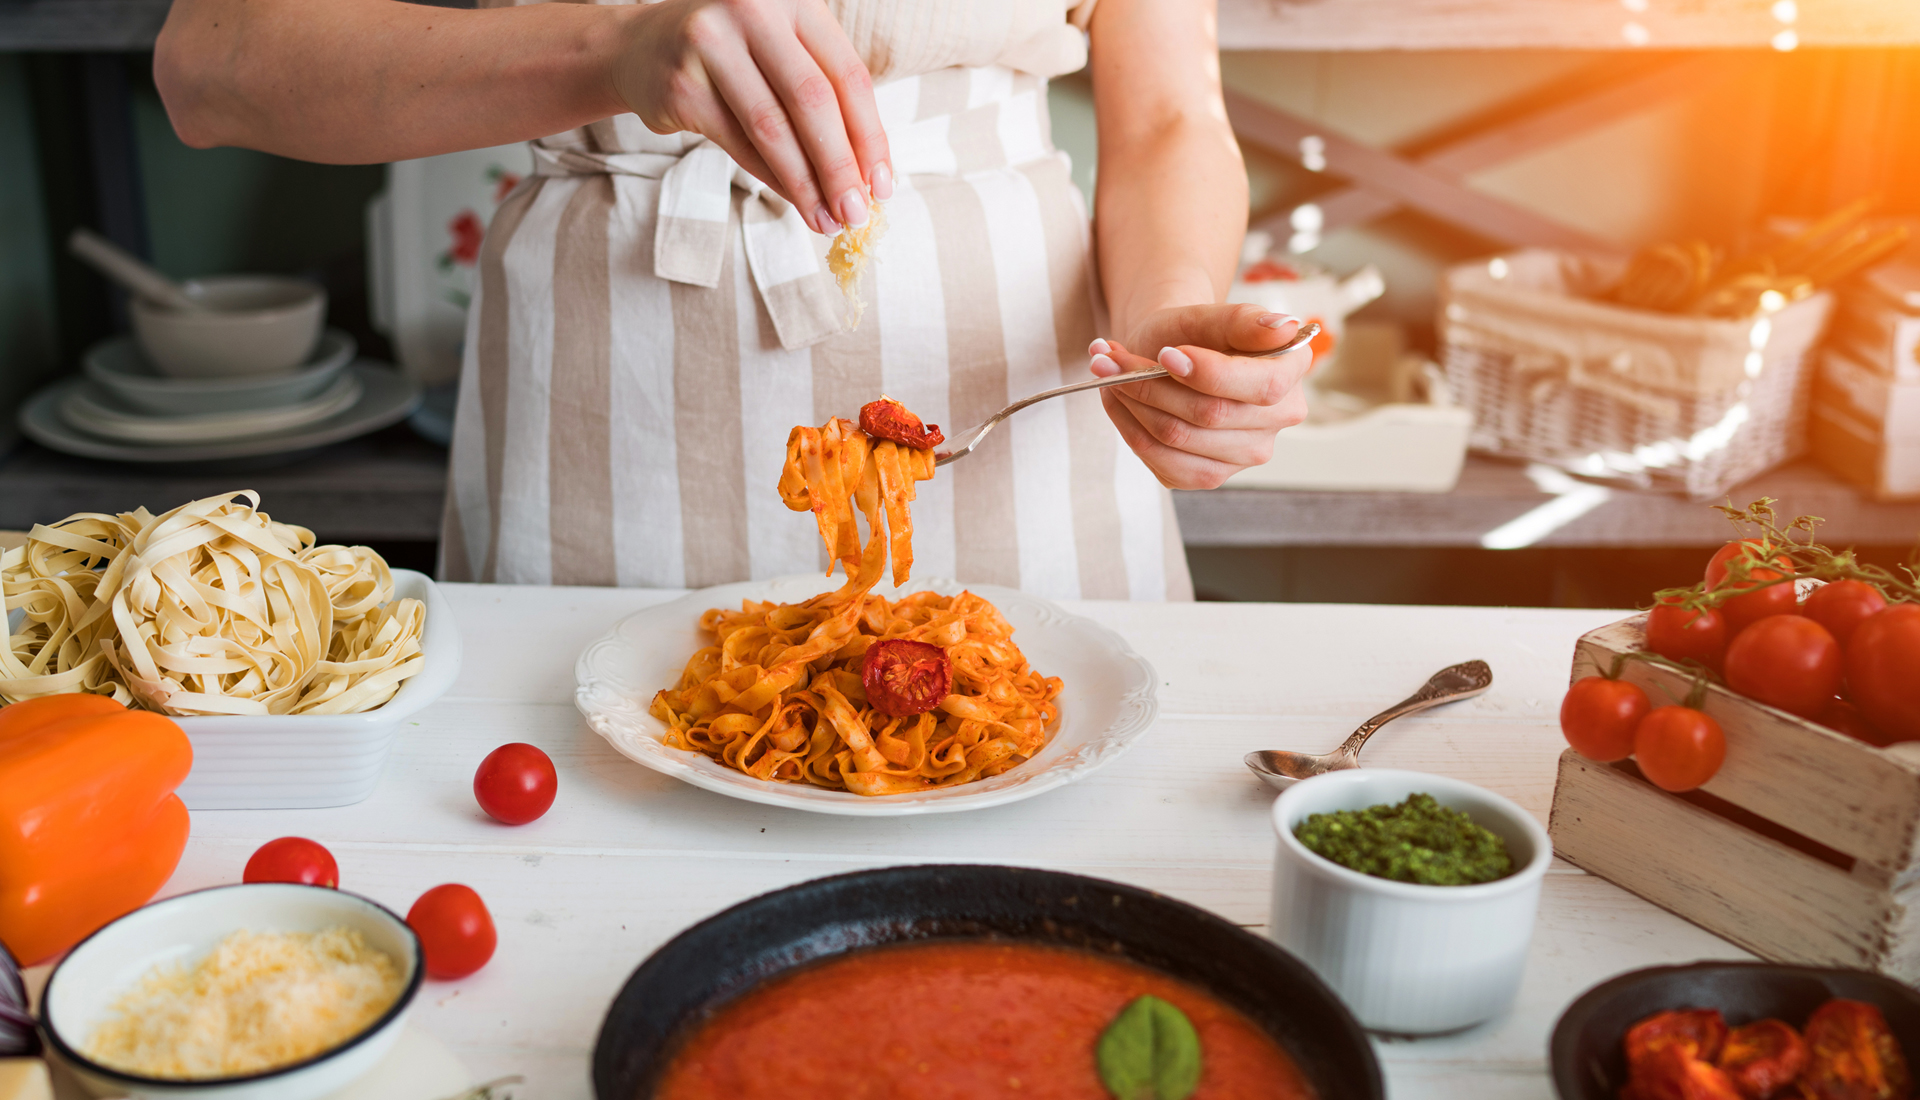 Private cooking lessons: Learn to make some great Italian dishes